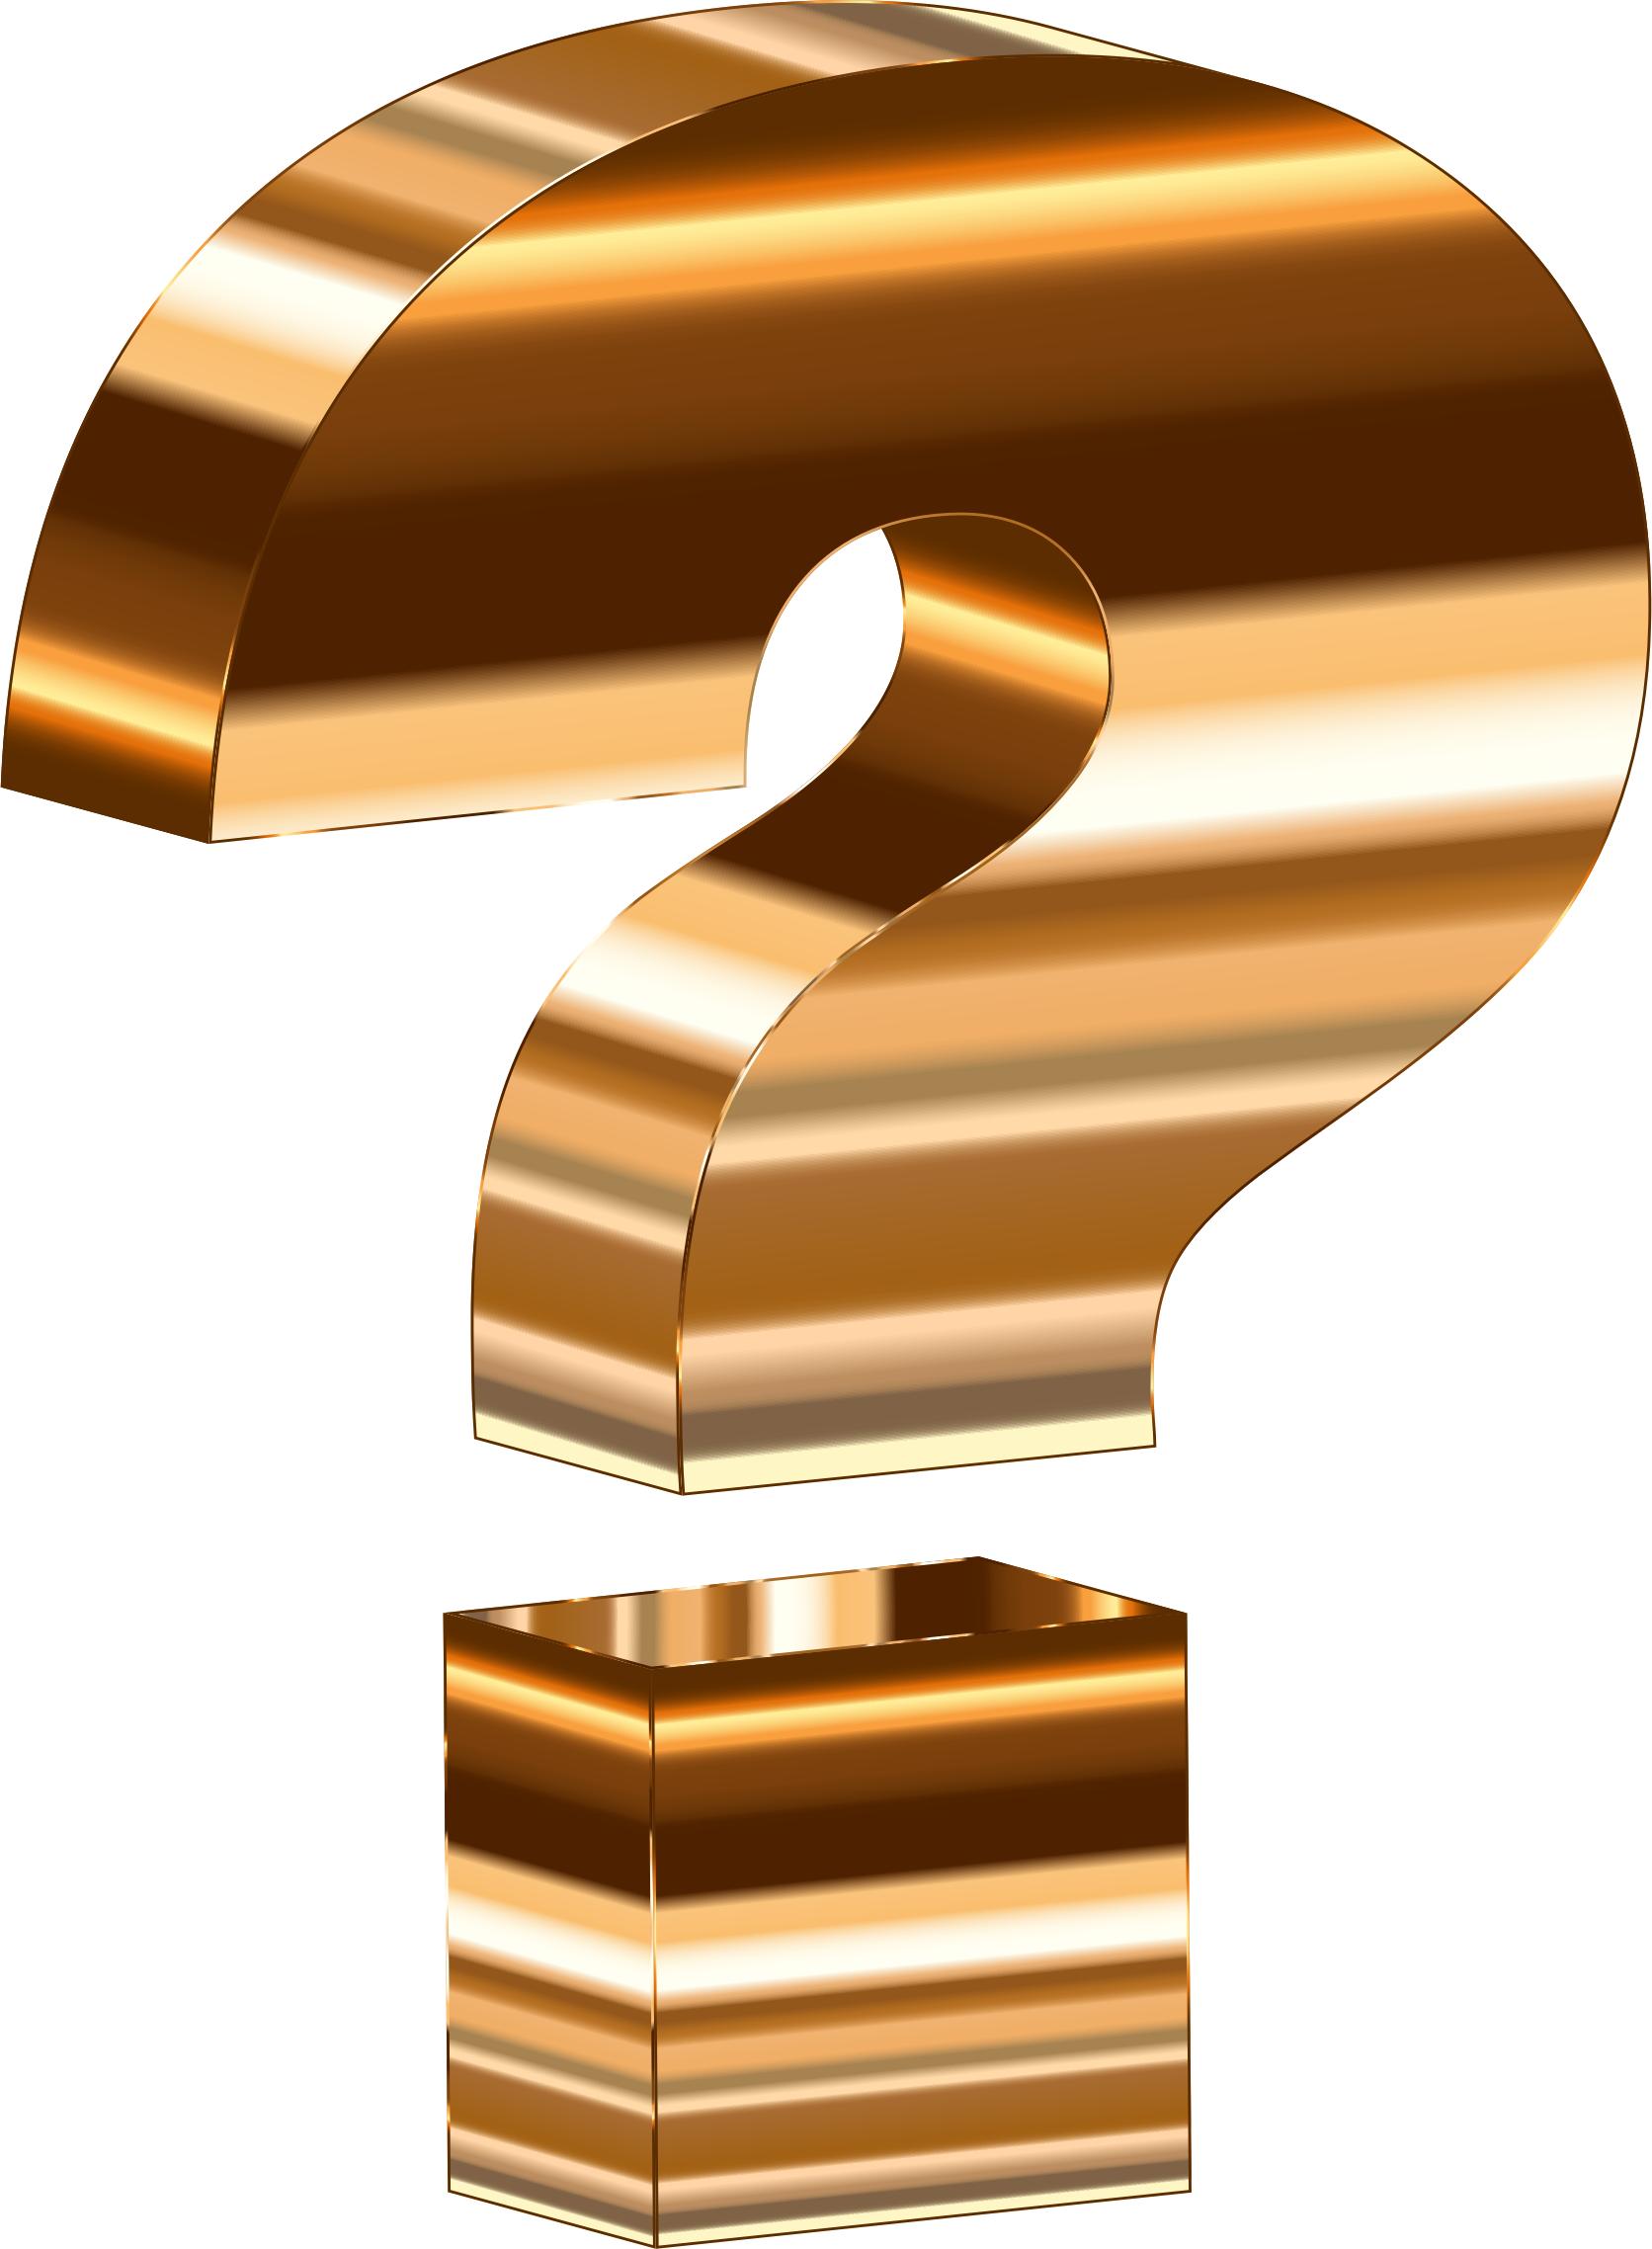 Polished Copper 3D Question Mark png